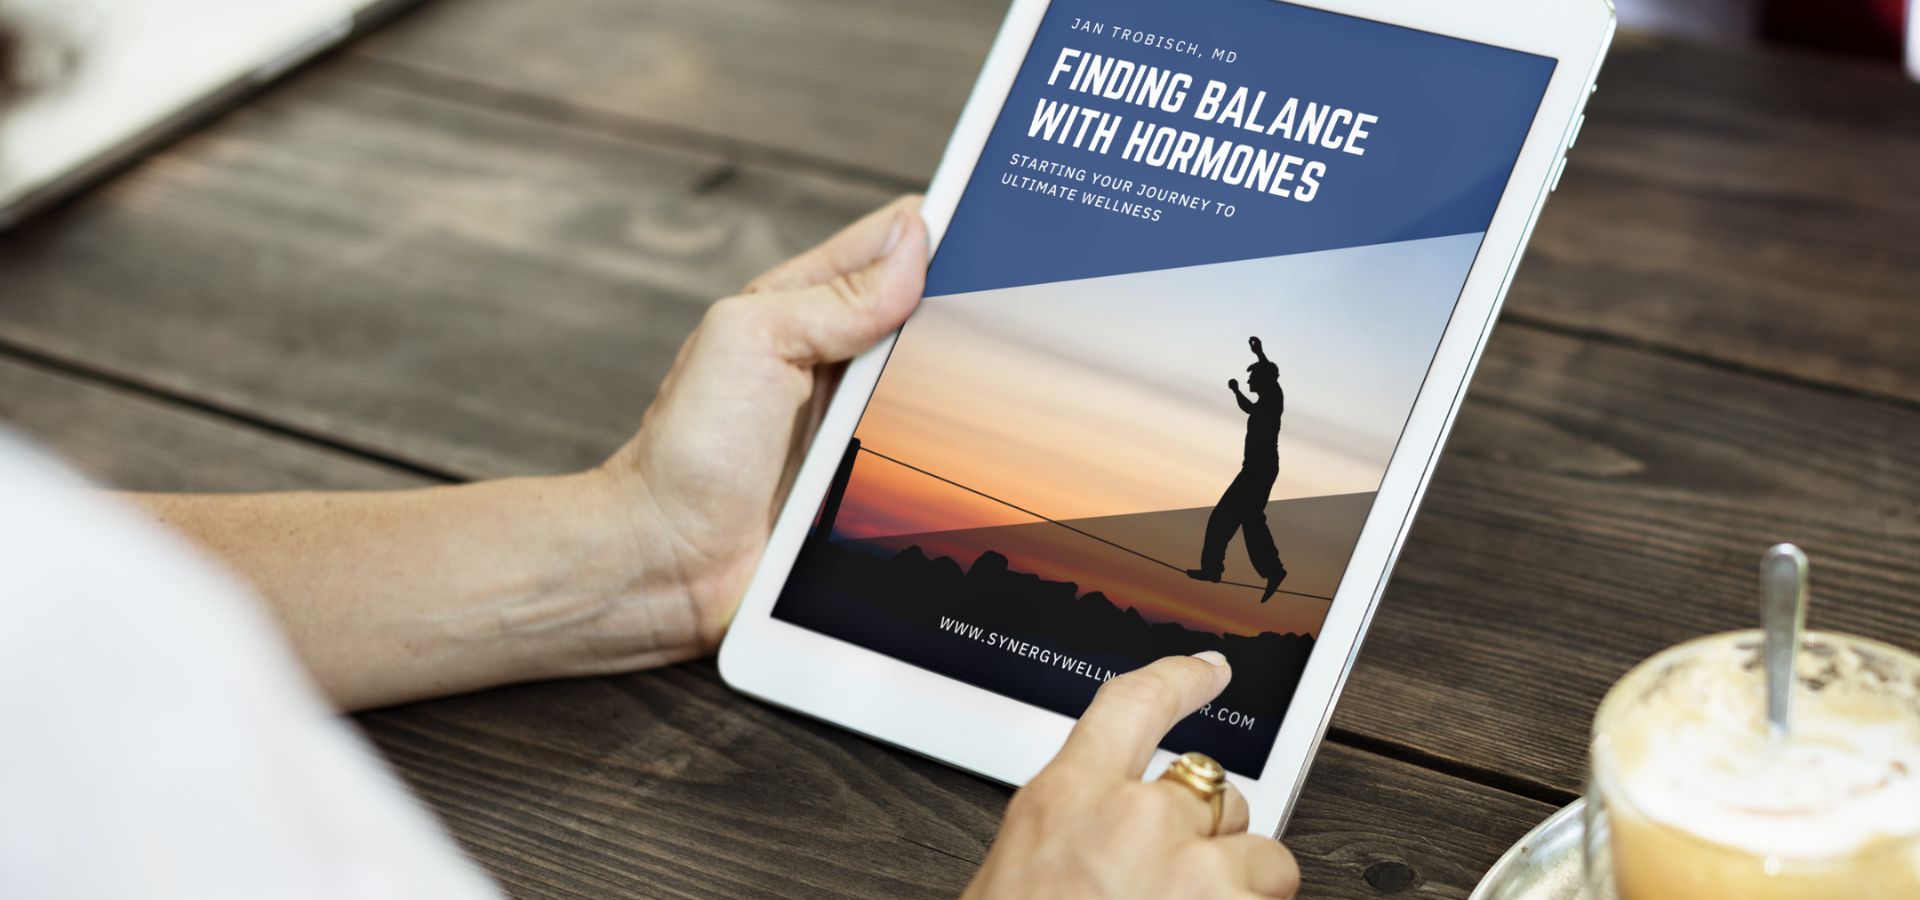 a person is holding a tablet that says finding balance with hormones